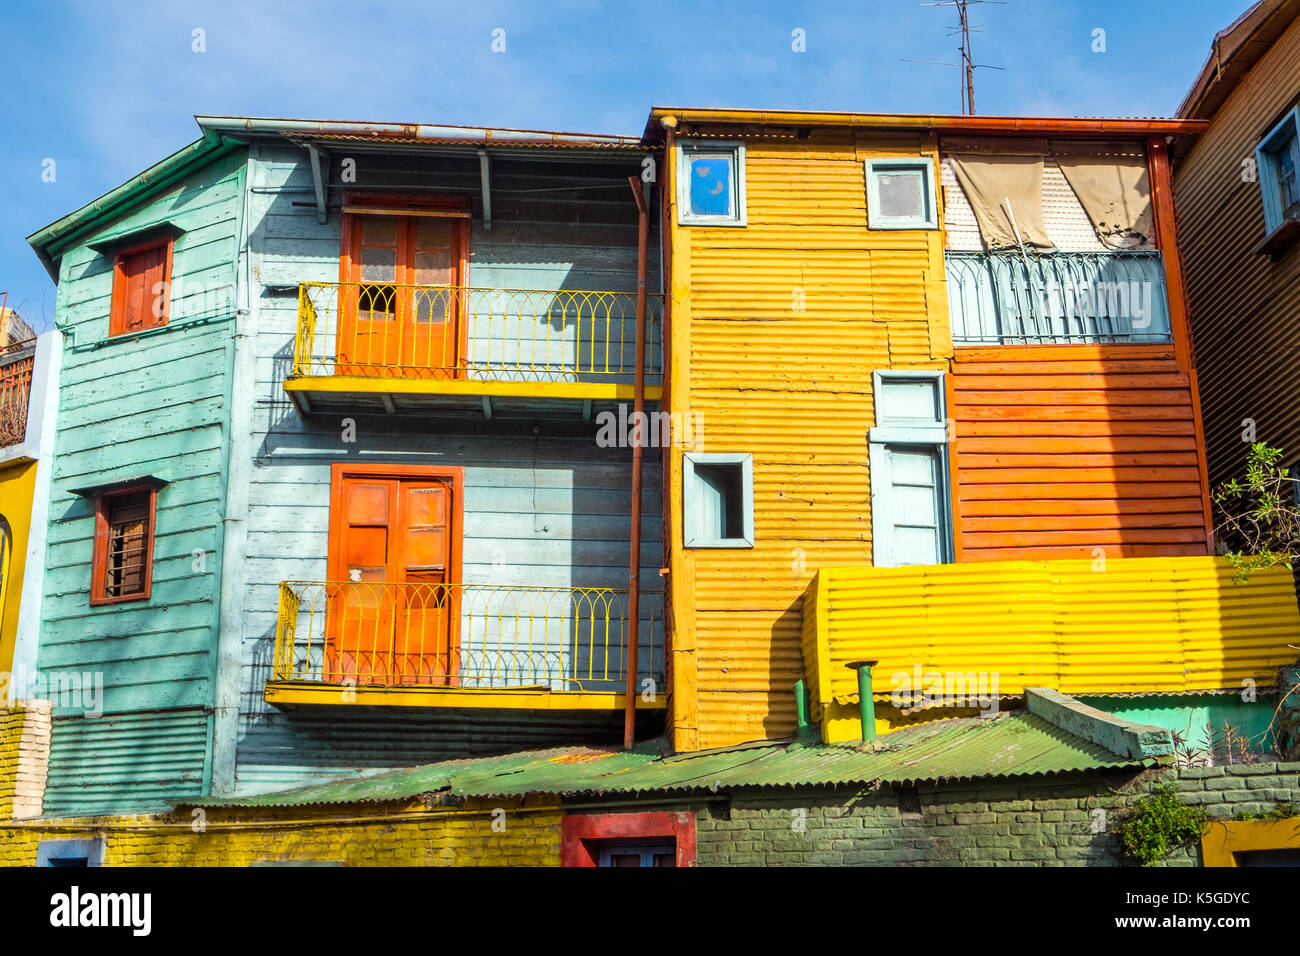 The colorful houses of La Boca in Buenos Aires, Argentina Stock Photo